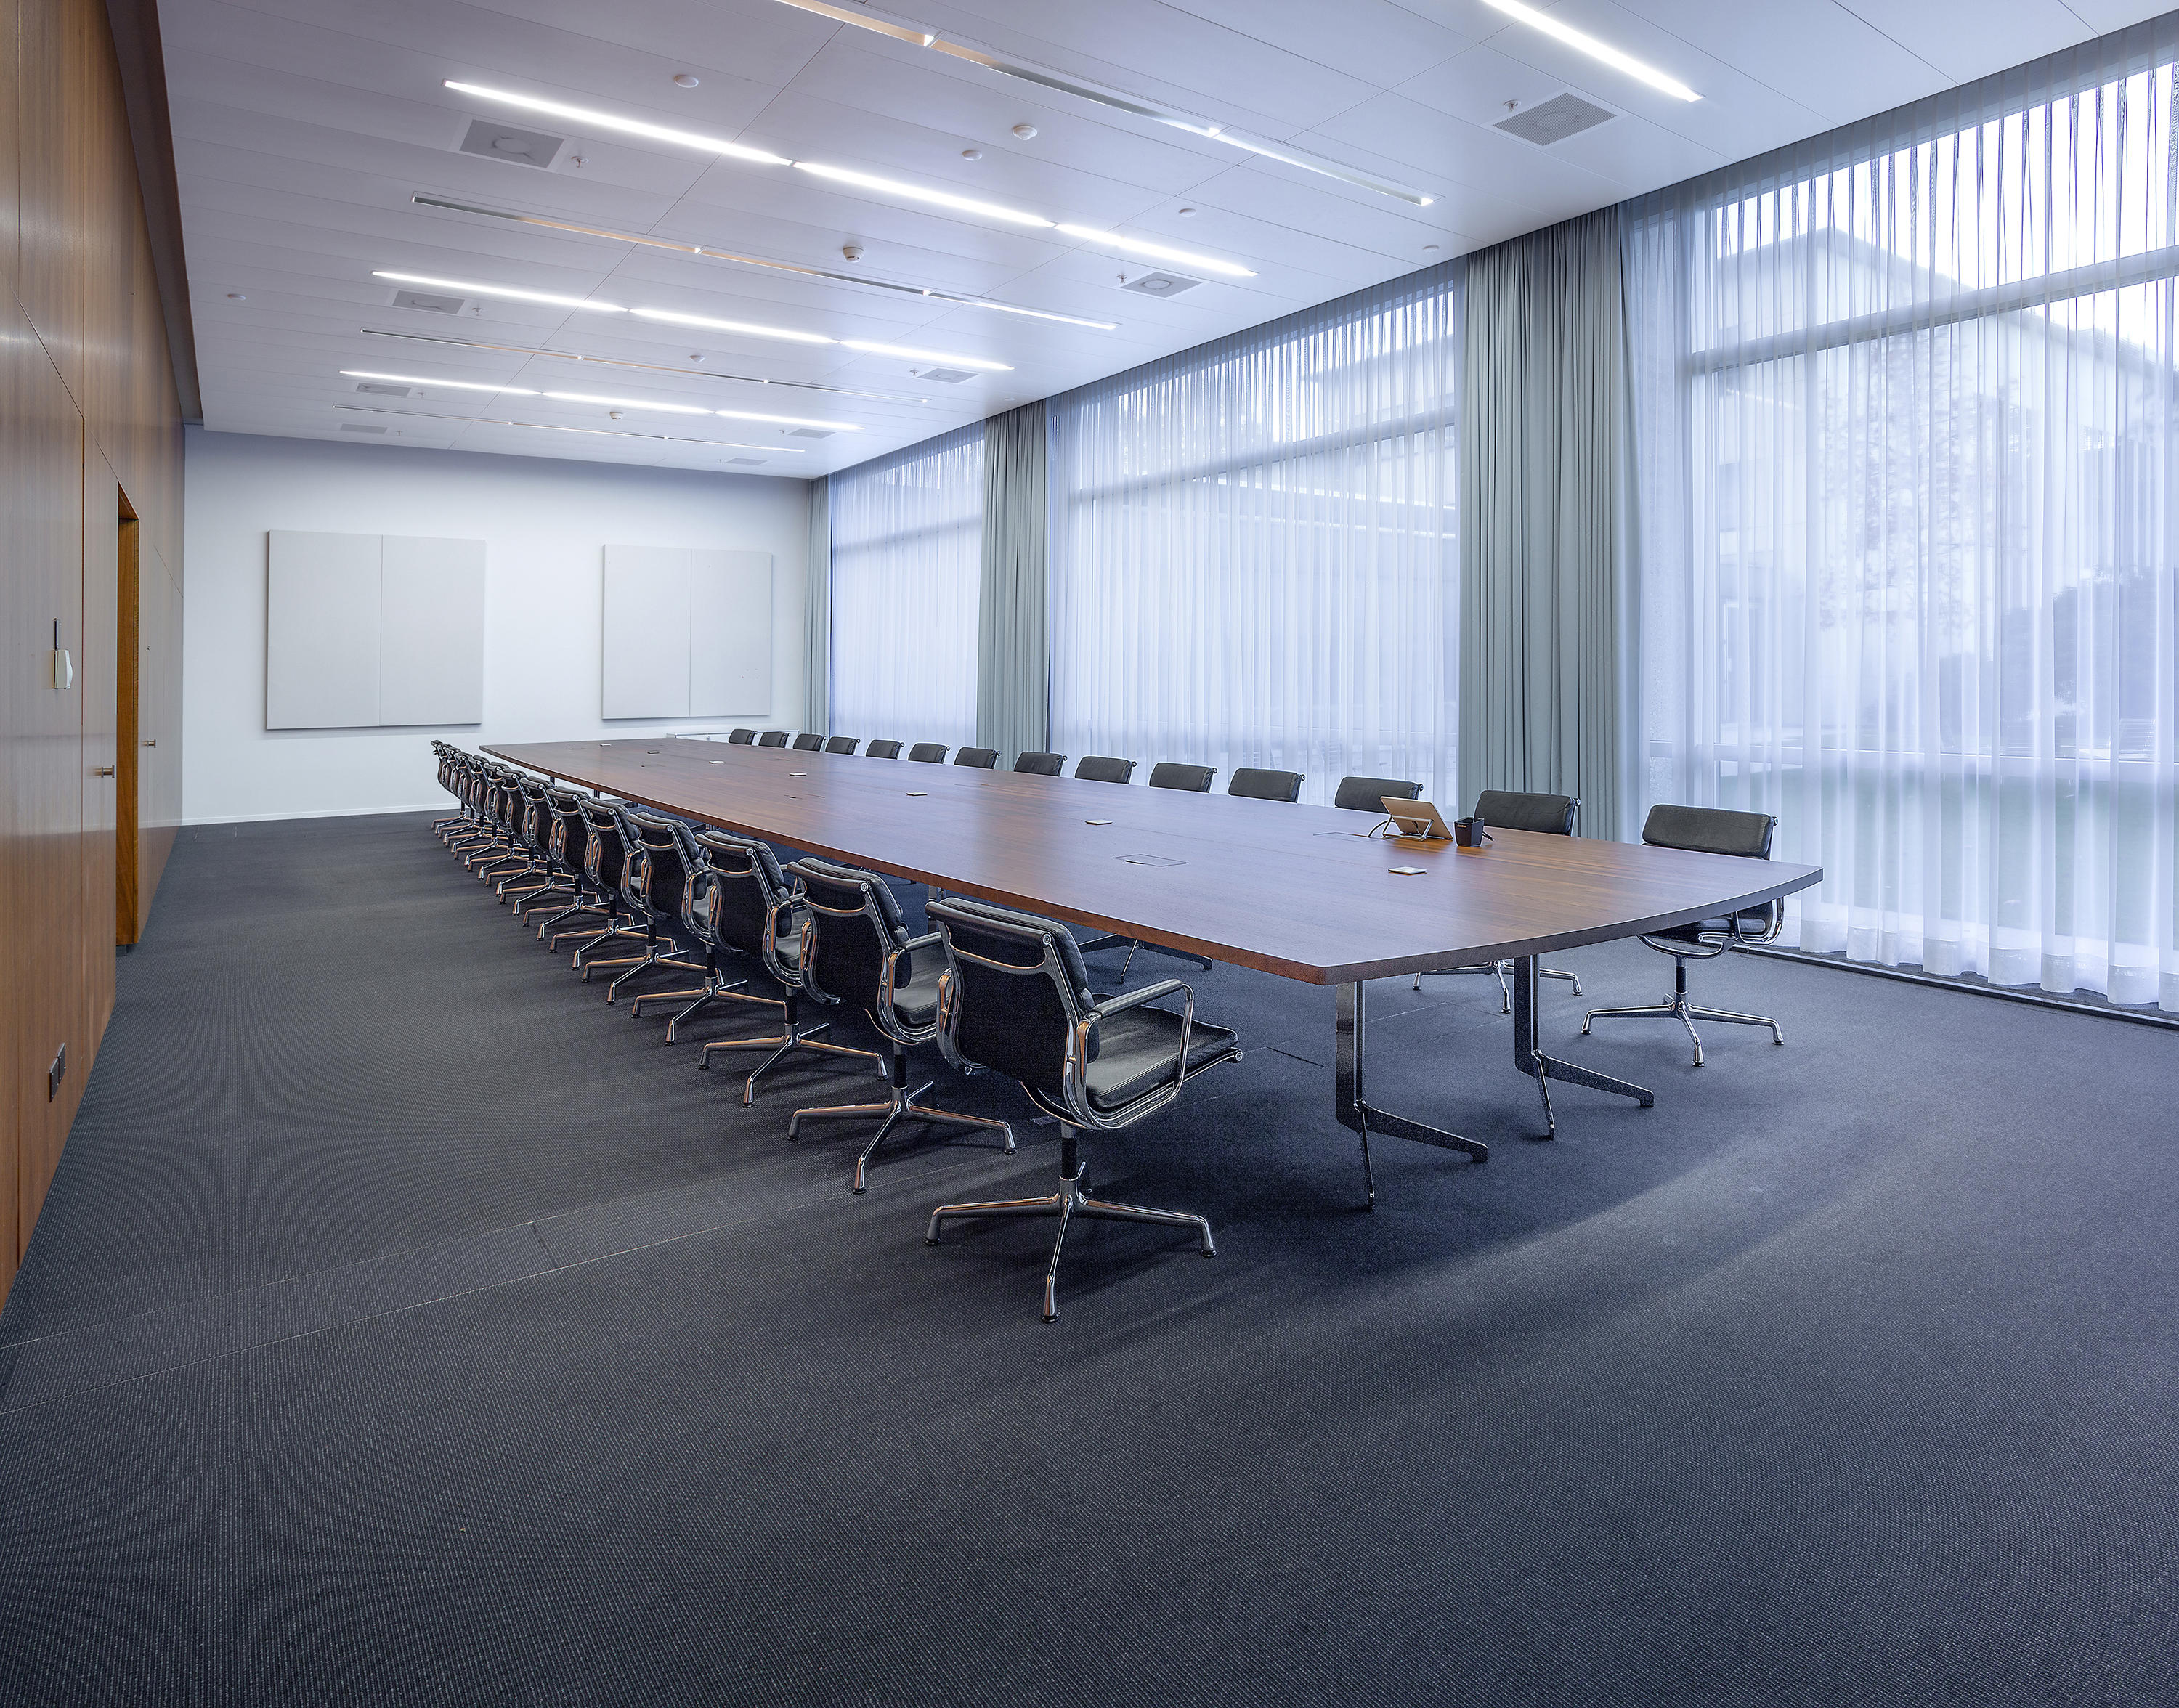 LYNX MEETING - Contract tables from Mobimex | Architonic